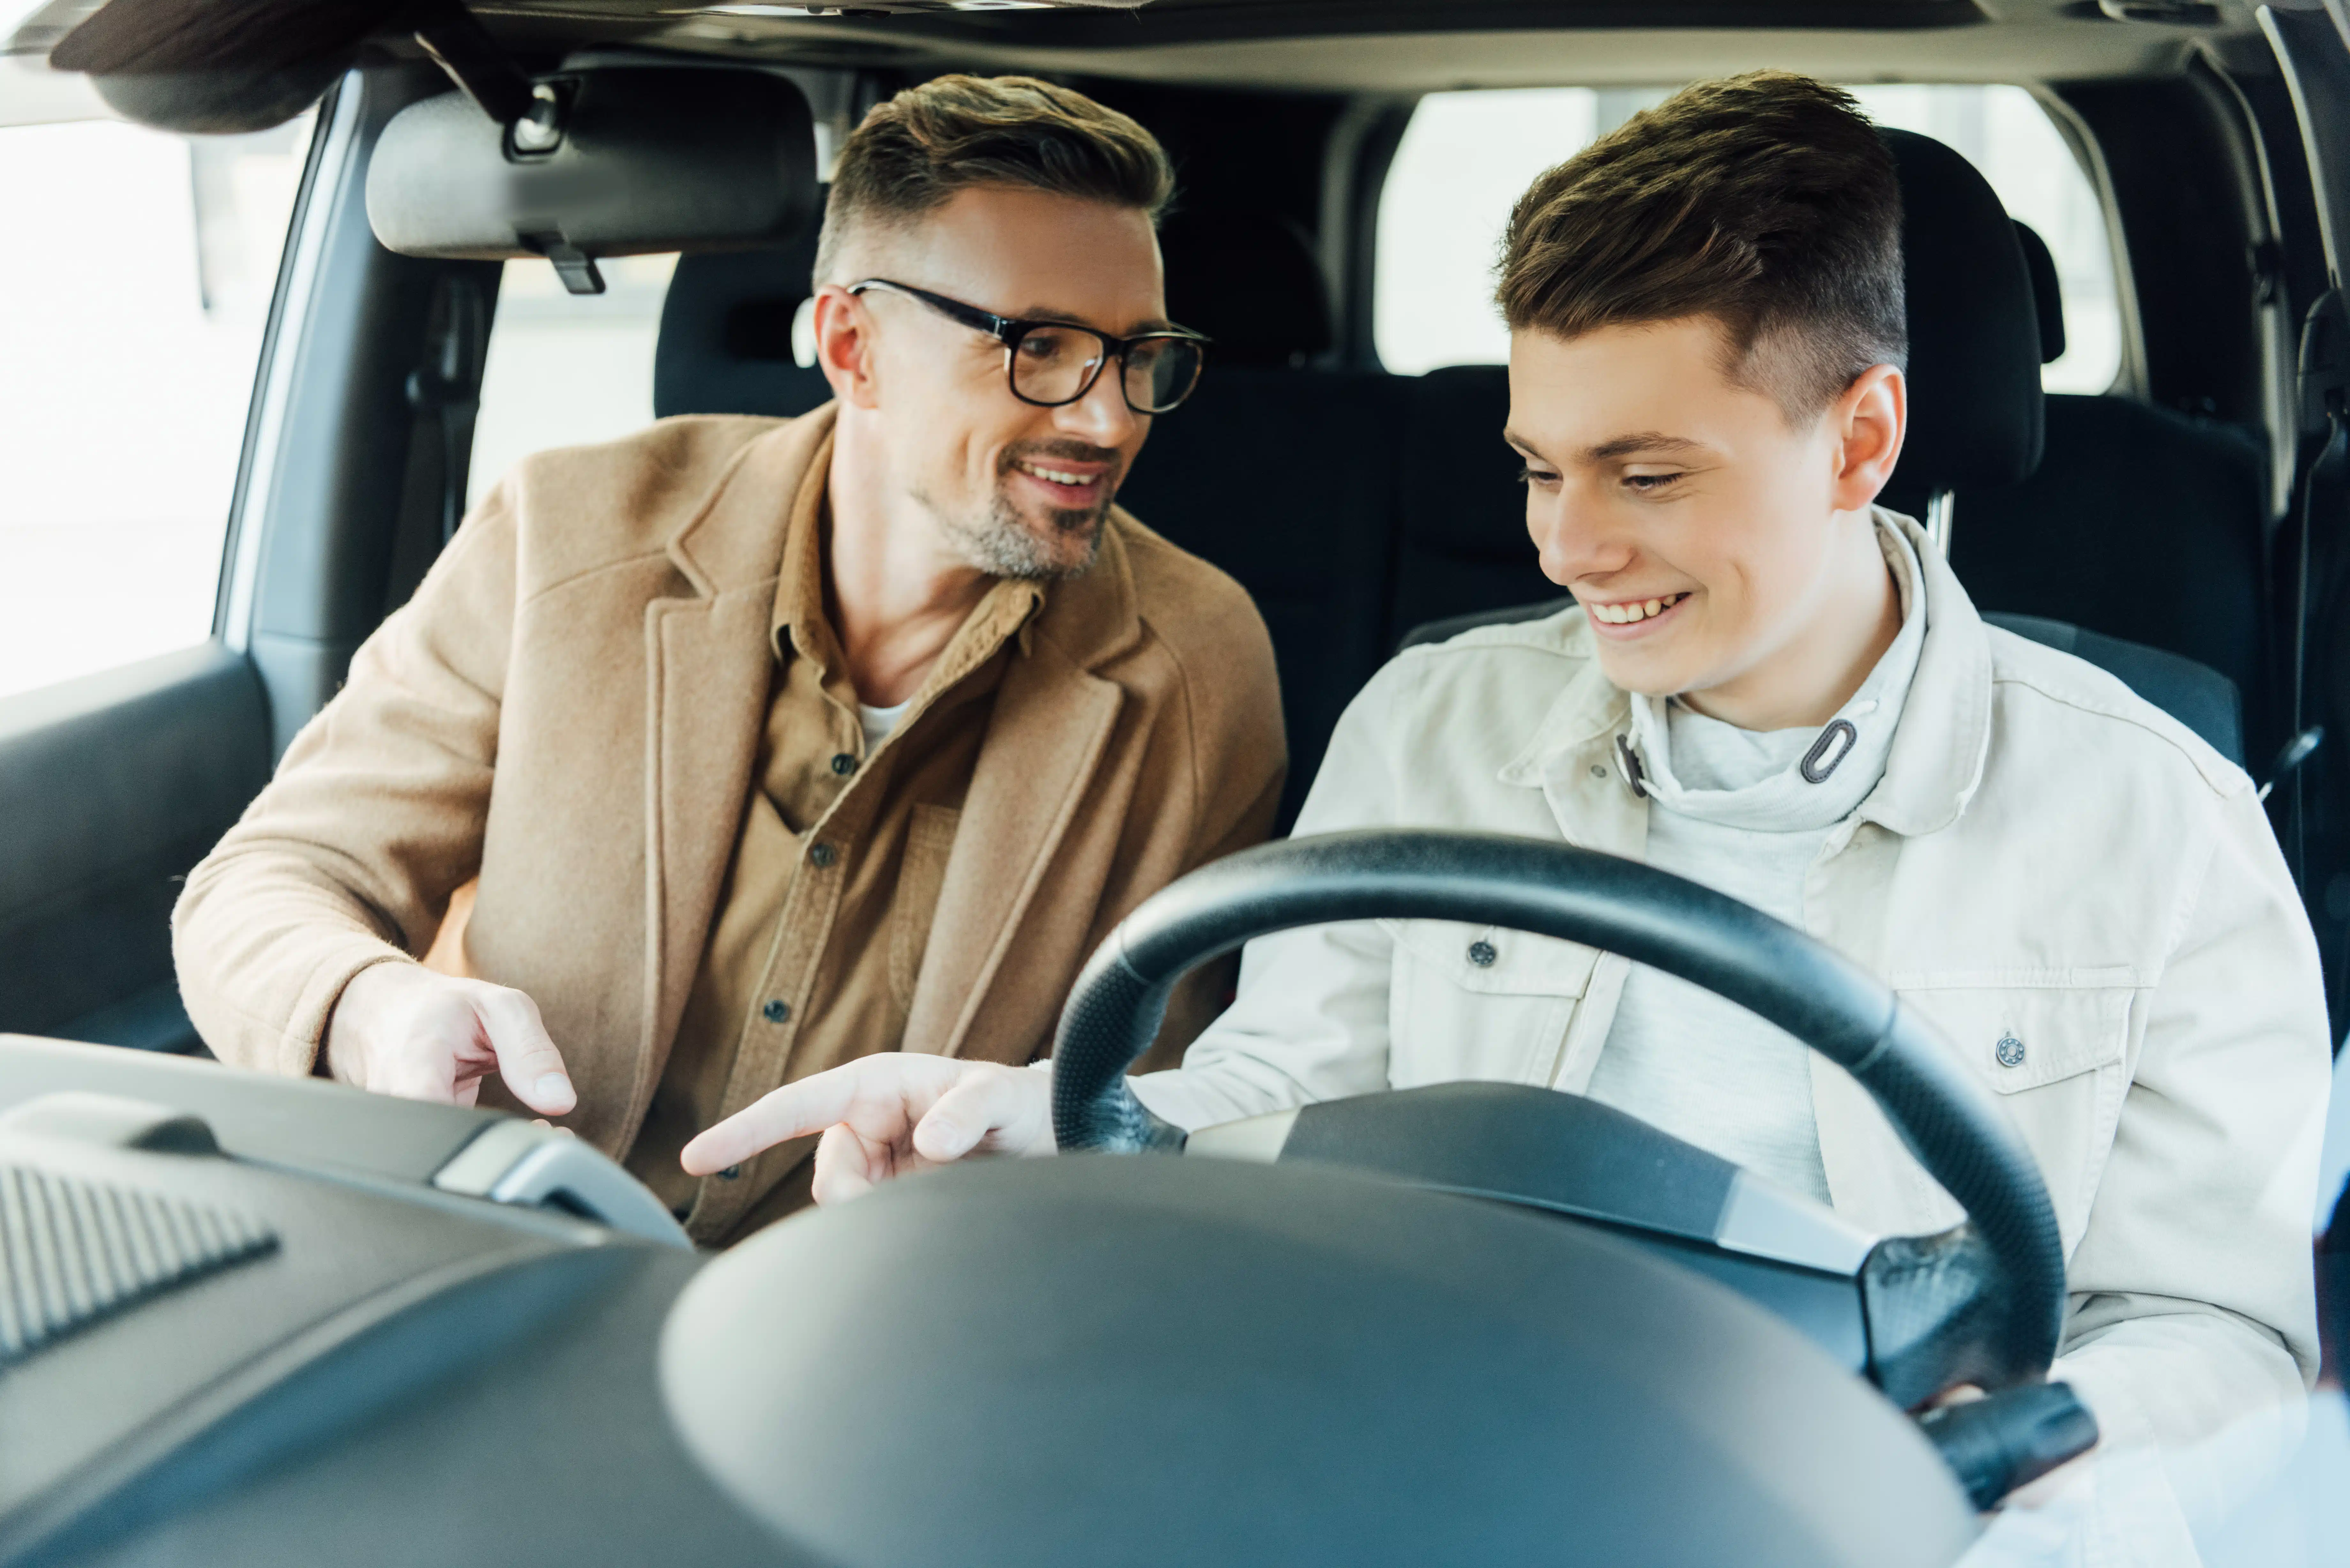 dad-teaching-son-how-to-drive